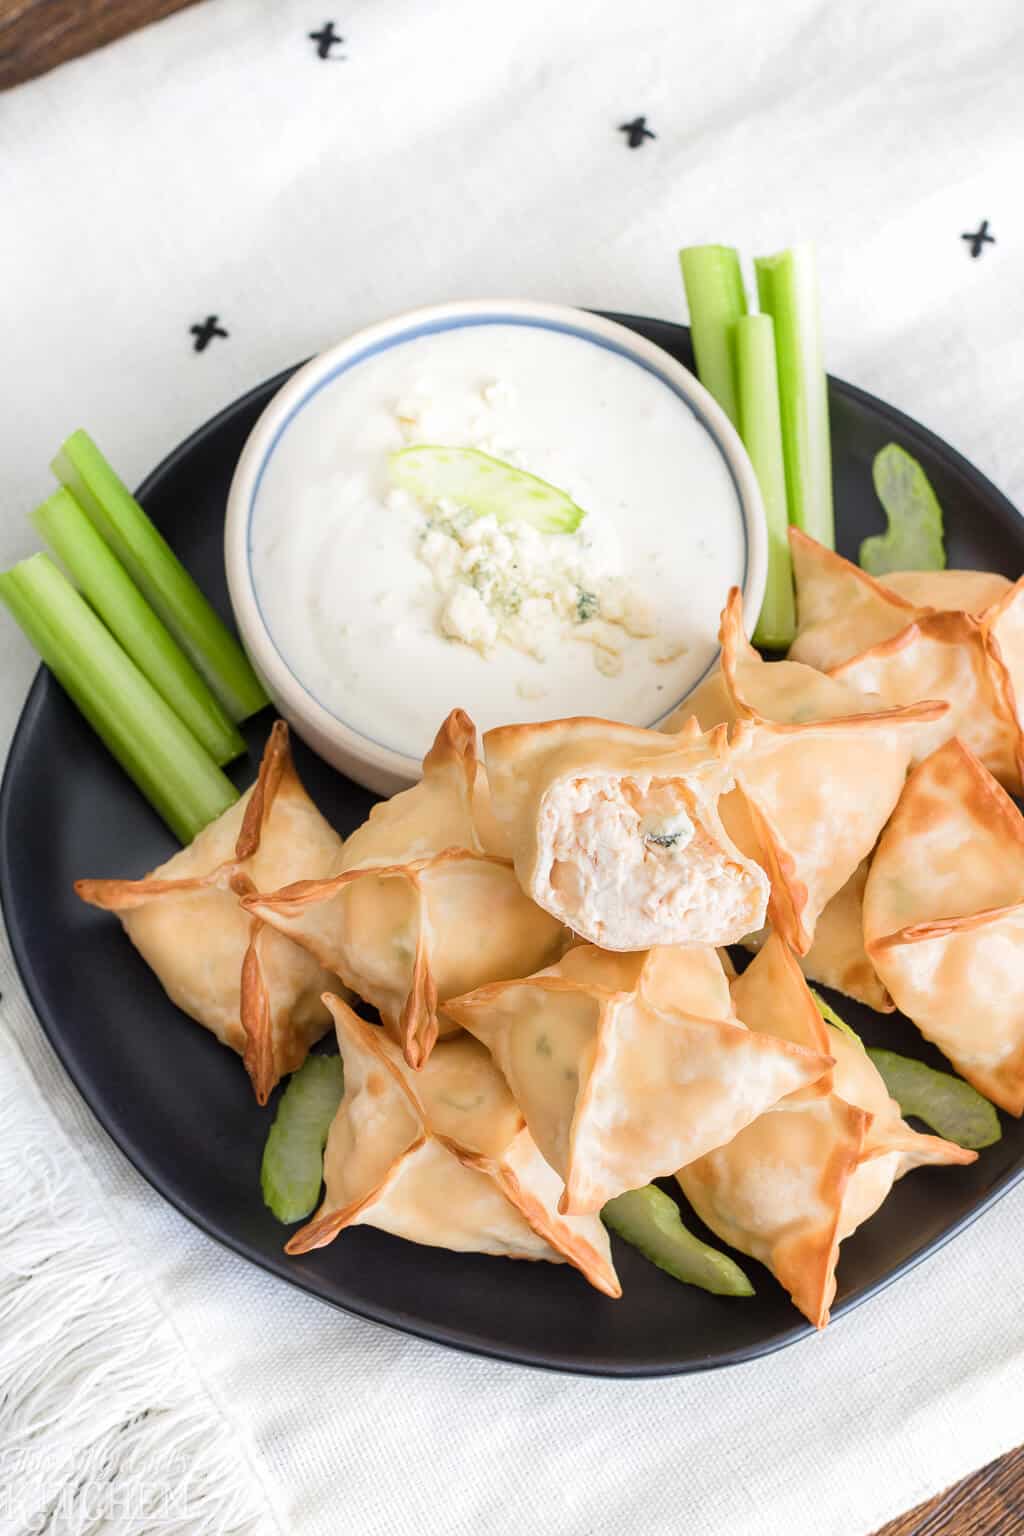 The Best Buffalo Chicken Wontons, only 6 ingredients and ready in 15 minutes, perfect for game day! #Recipe from ThisSillyGirlsKitchen.com #buffalochicken #wontons #airfryer